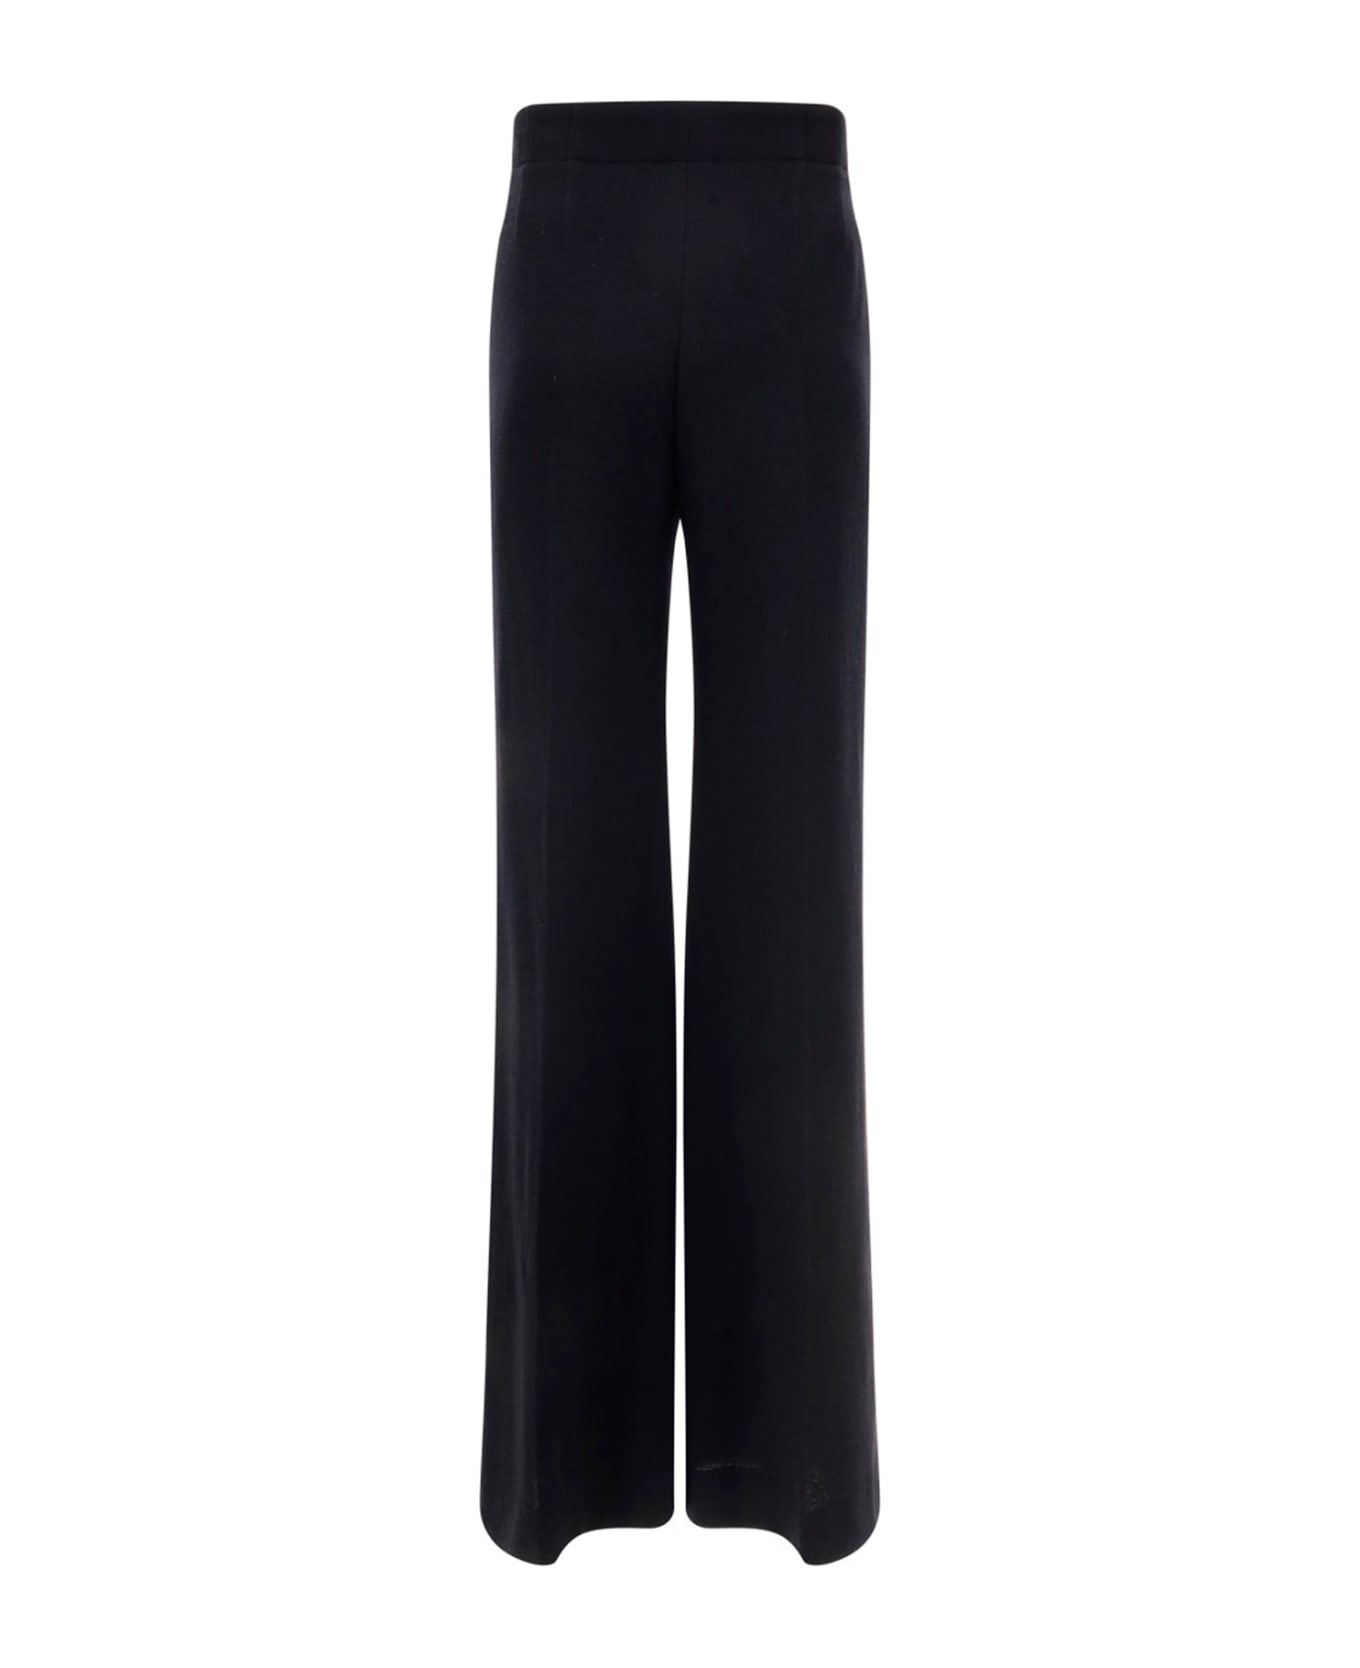 Chloé Wool And Cashmere Pants - Black